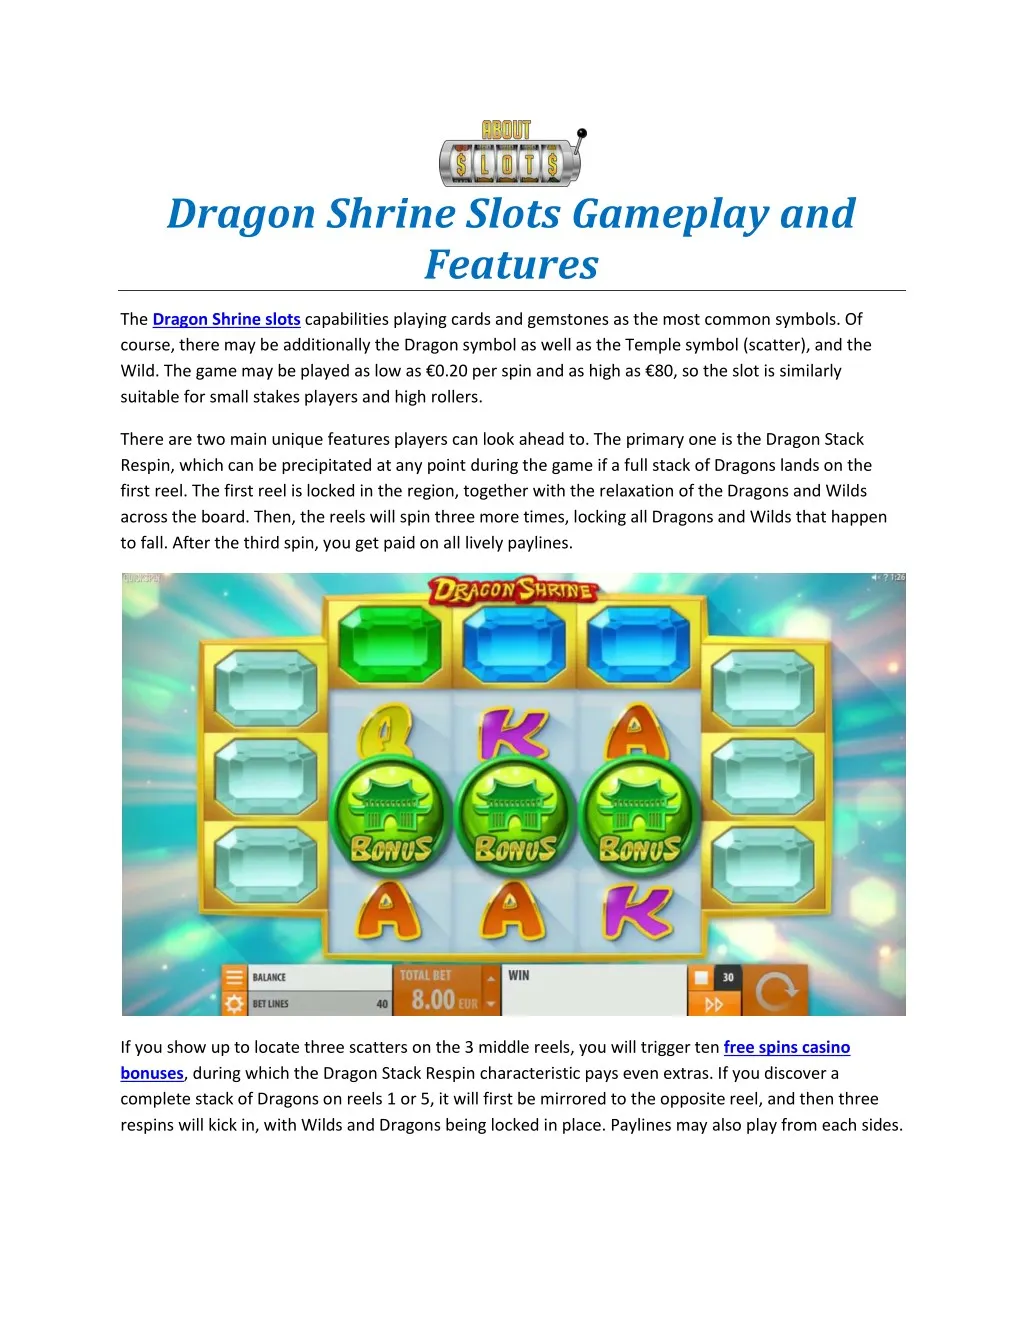 dragon shrine slots gameplay and features n.